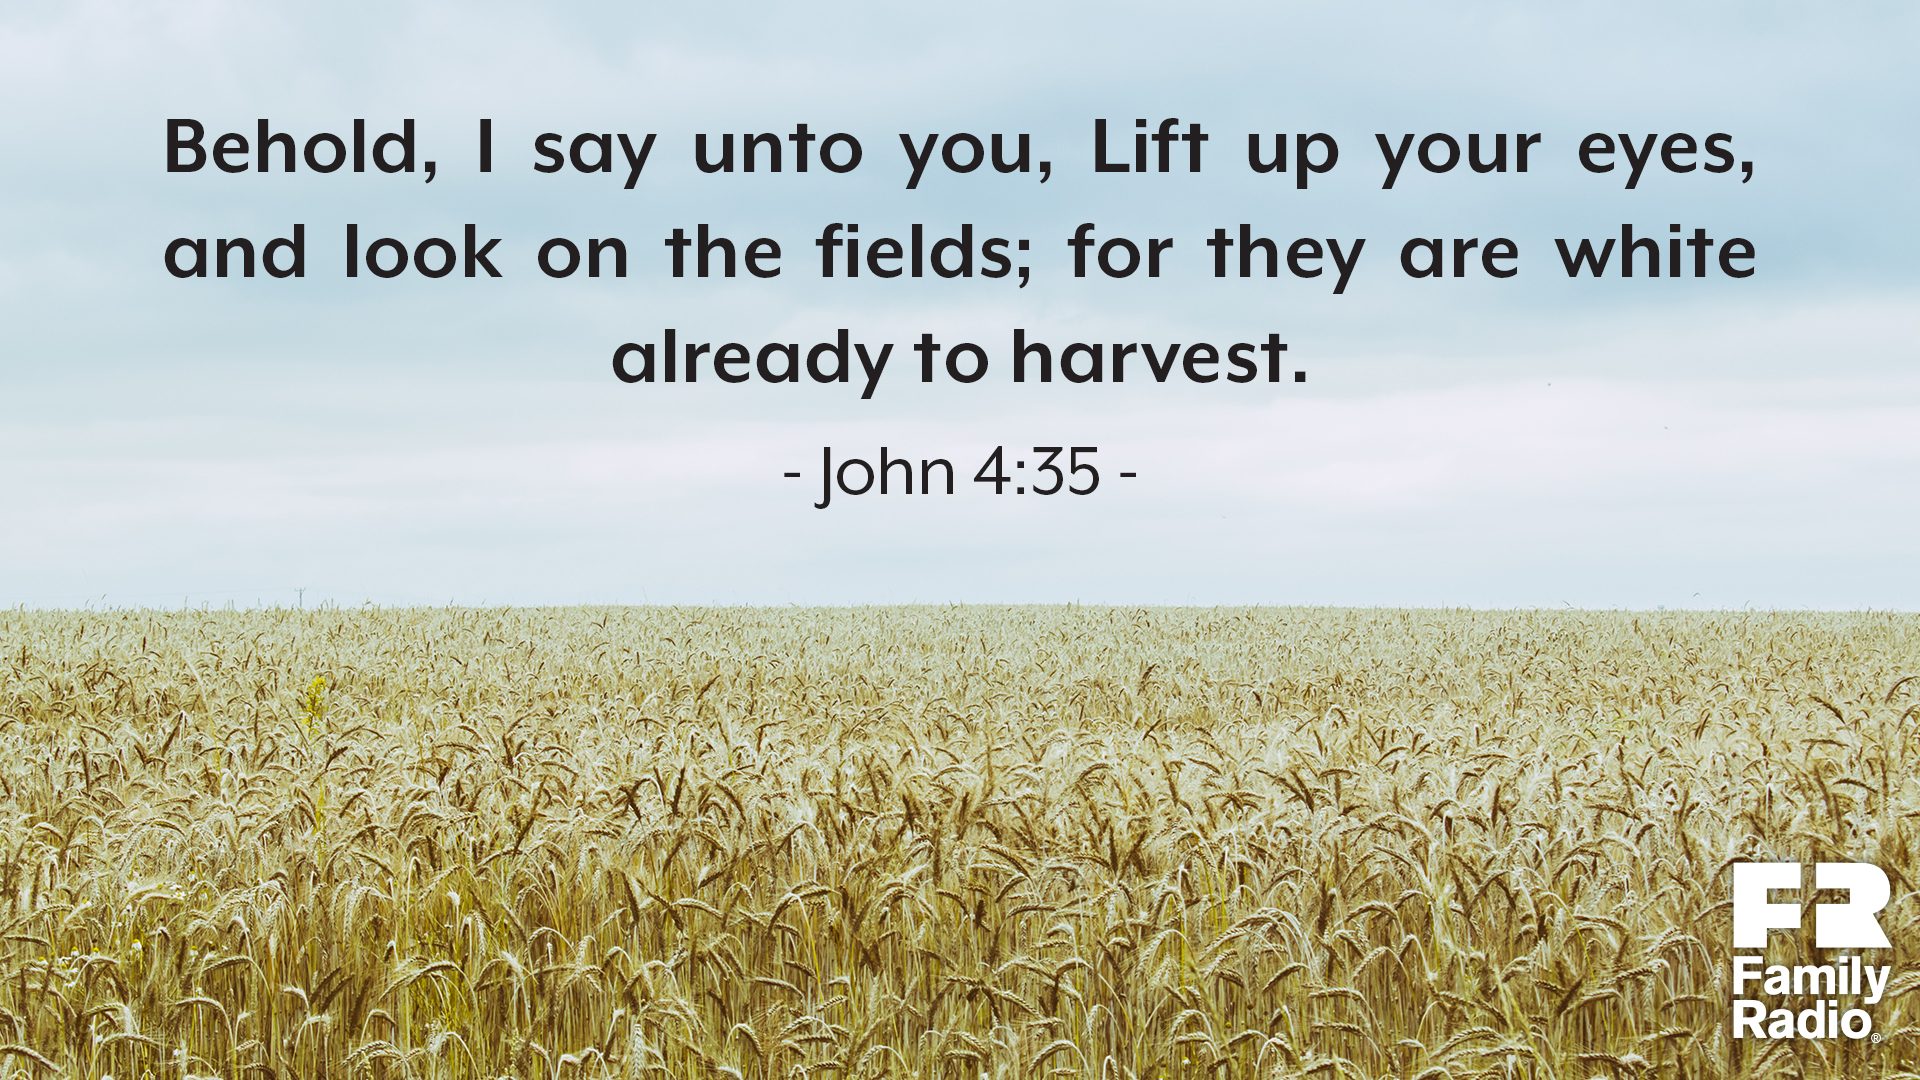 "Behold, I say unto you, Lift up your eyes, and look on the fields; for they are white already to harvest."